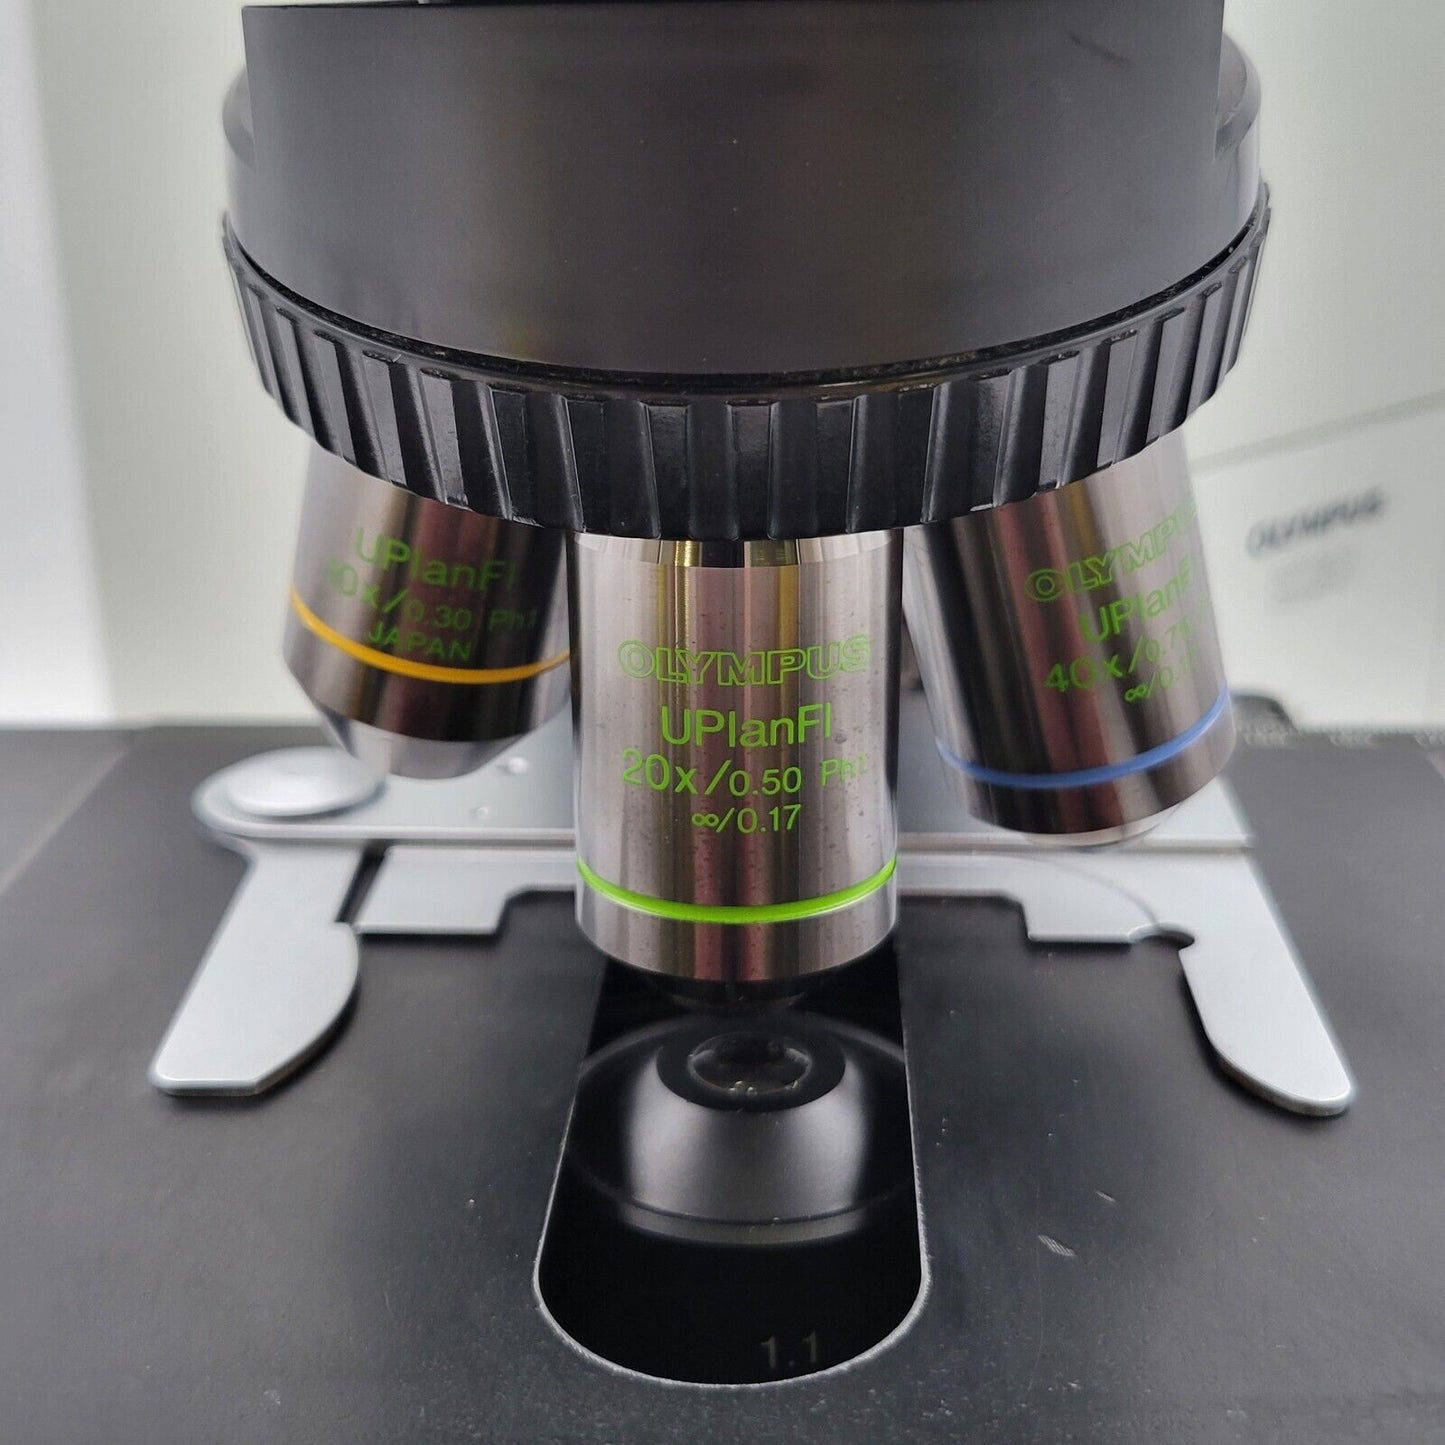 Olympus Microscope BX50 with Phase Contrast & Fluorite Objectives - microscopemarketplace